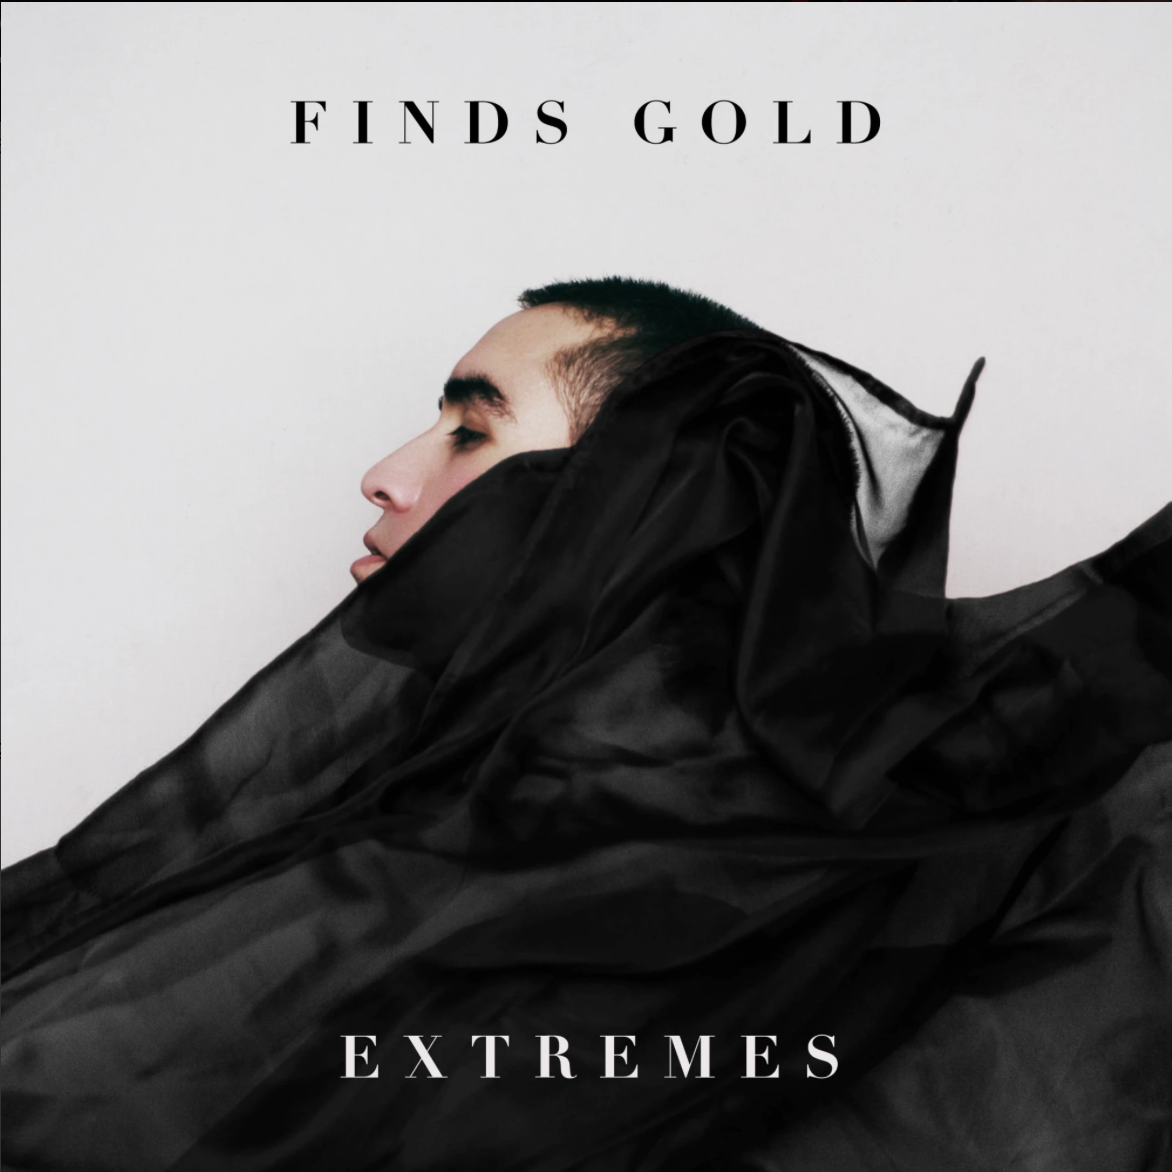 “Extremes” EP by Finds Gold: A Journey Through Bipolar Disorder